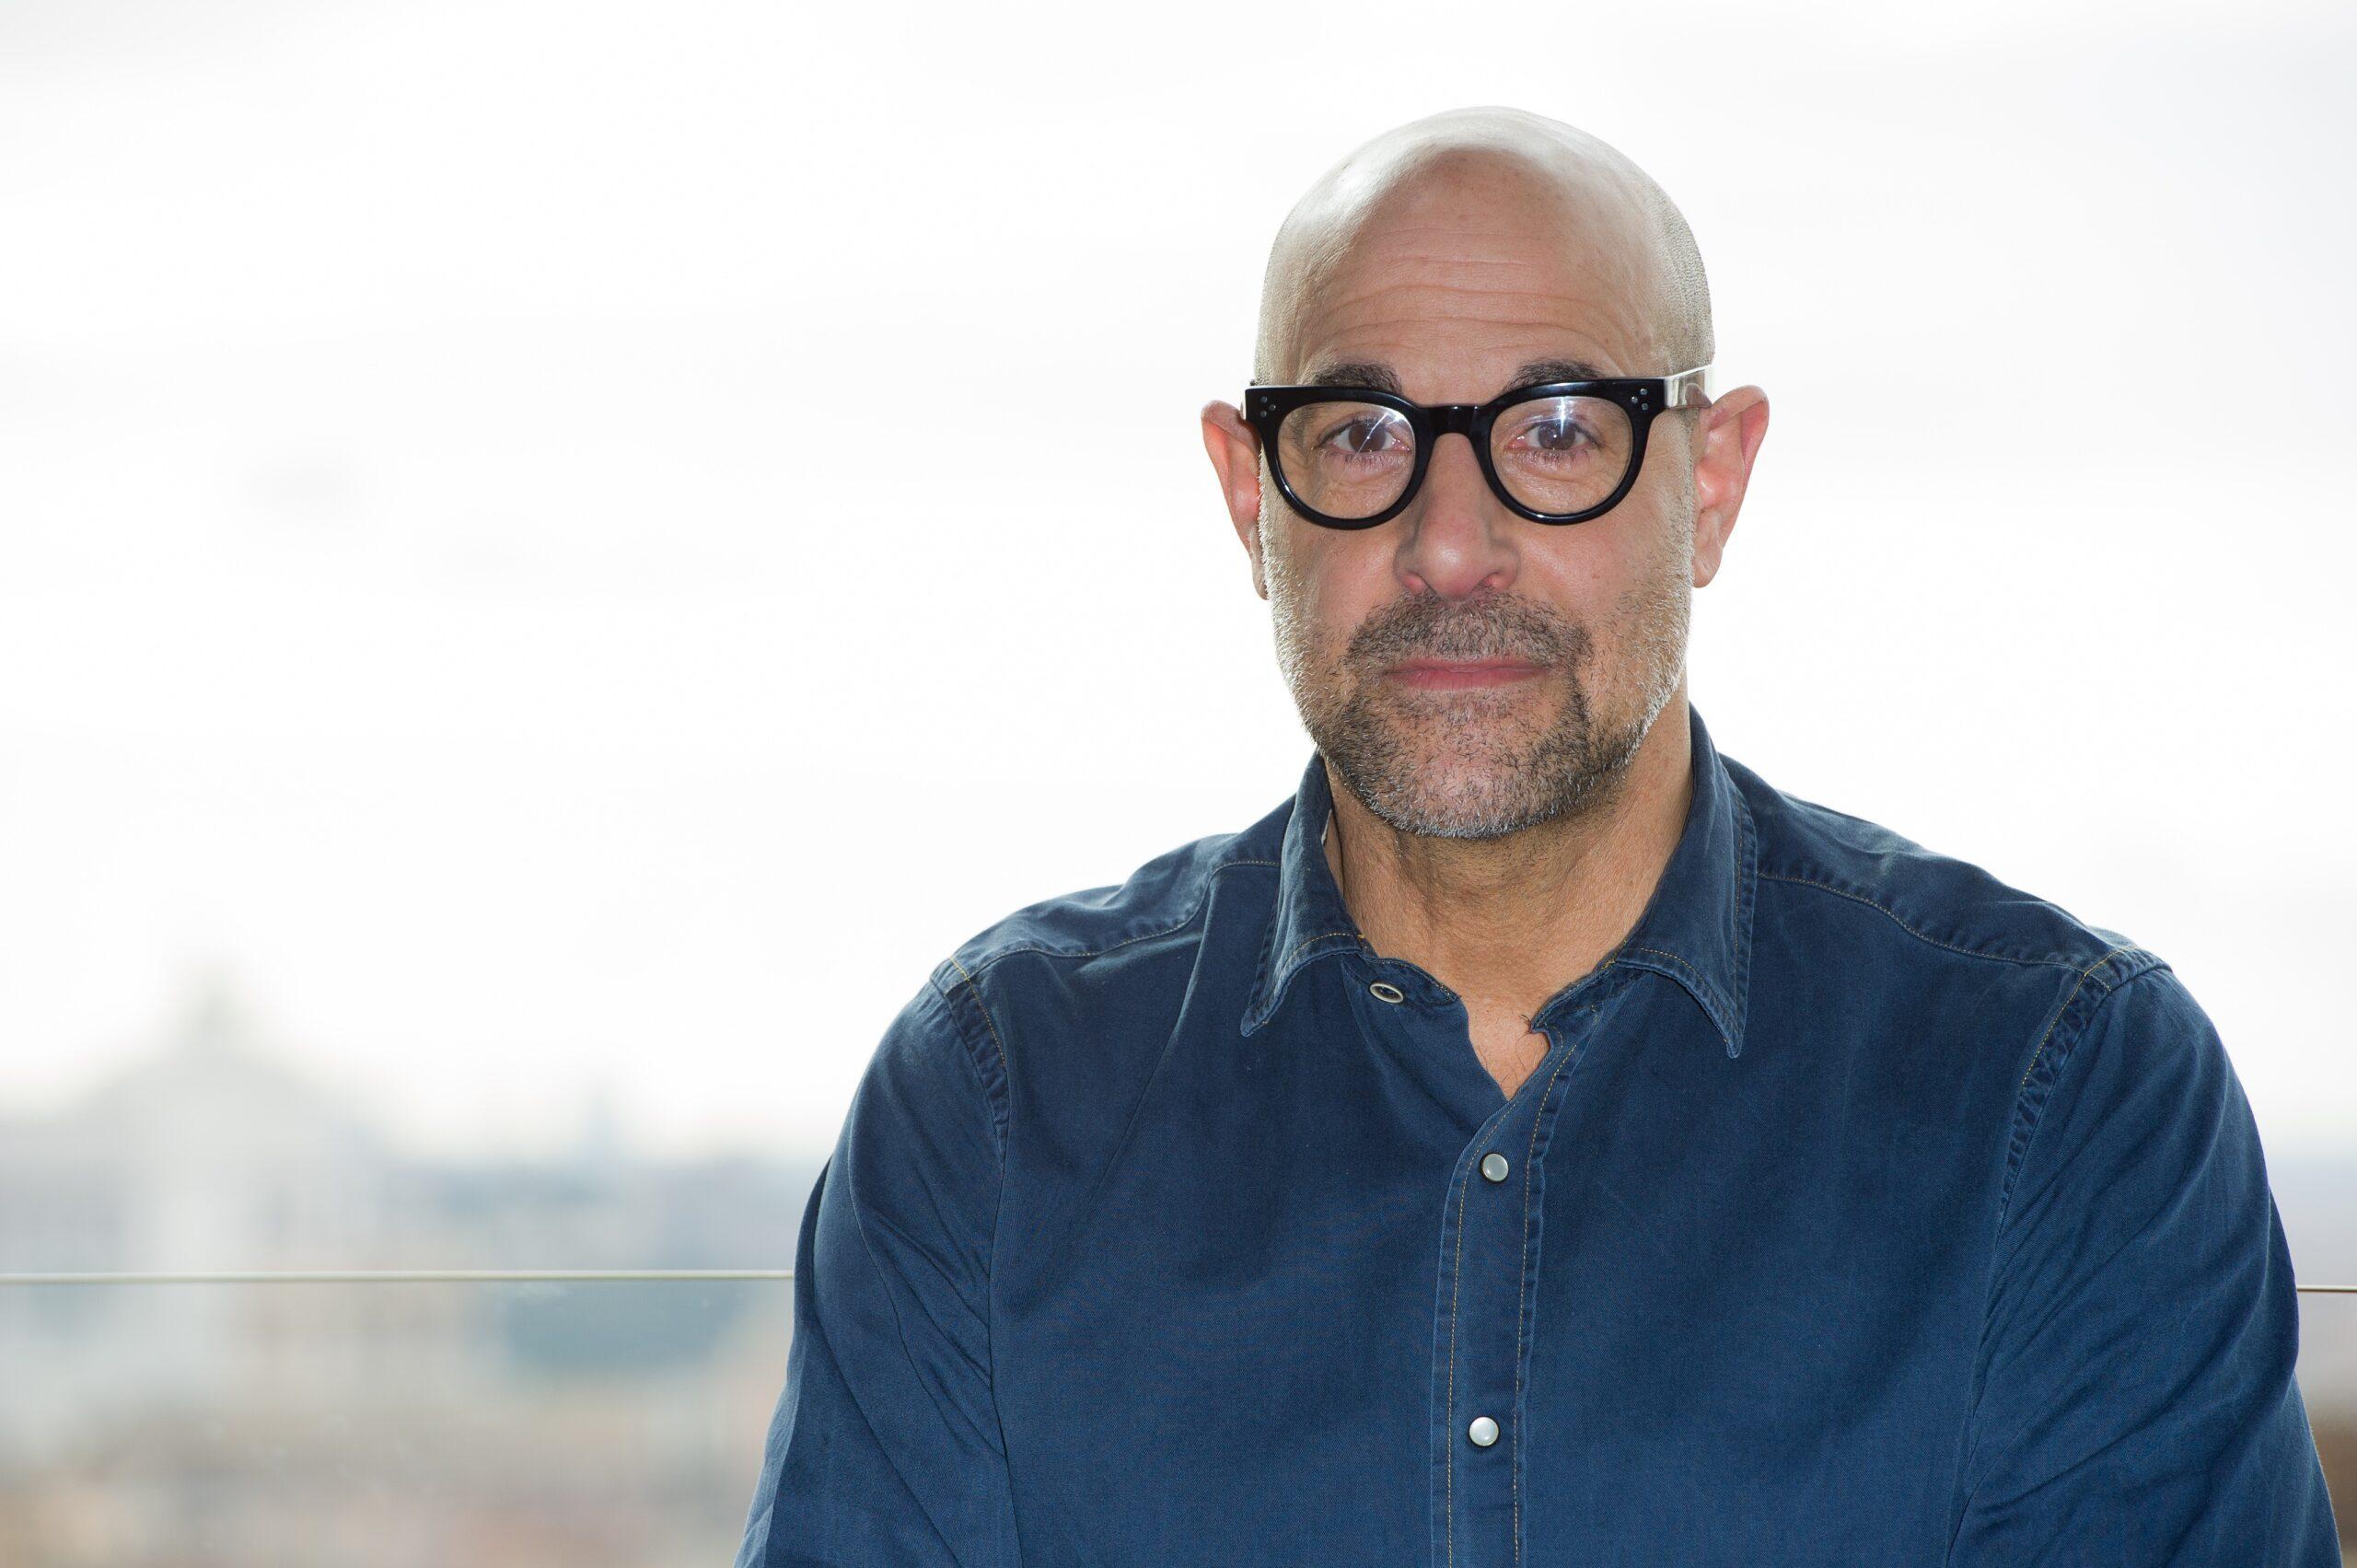 Stanley Tucci attends at the Final Portrait photocall